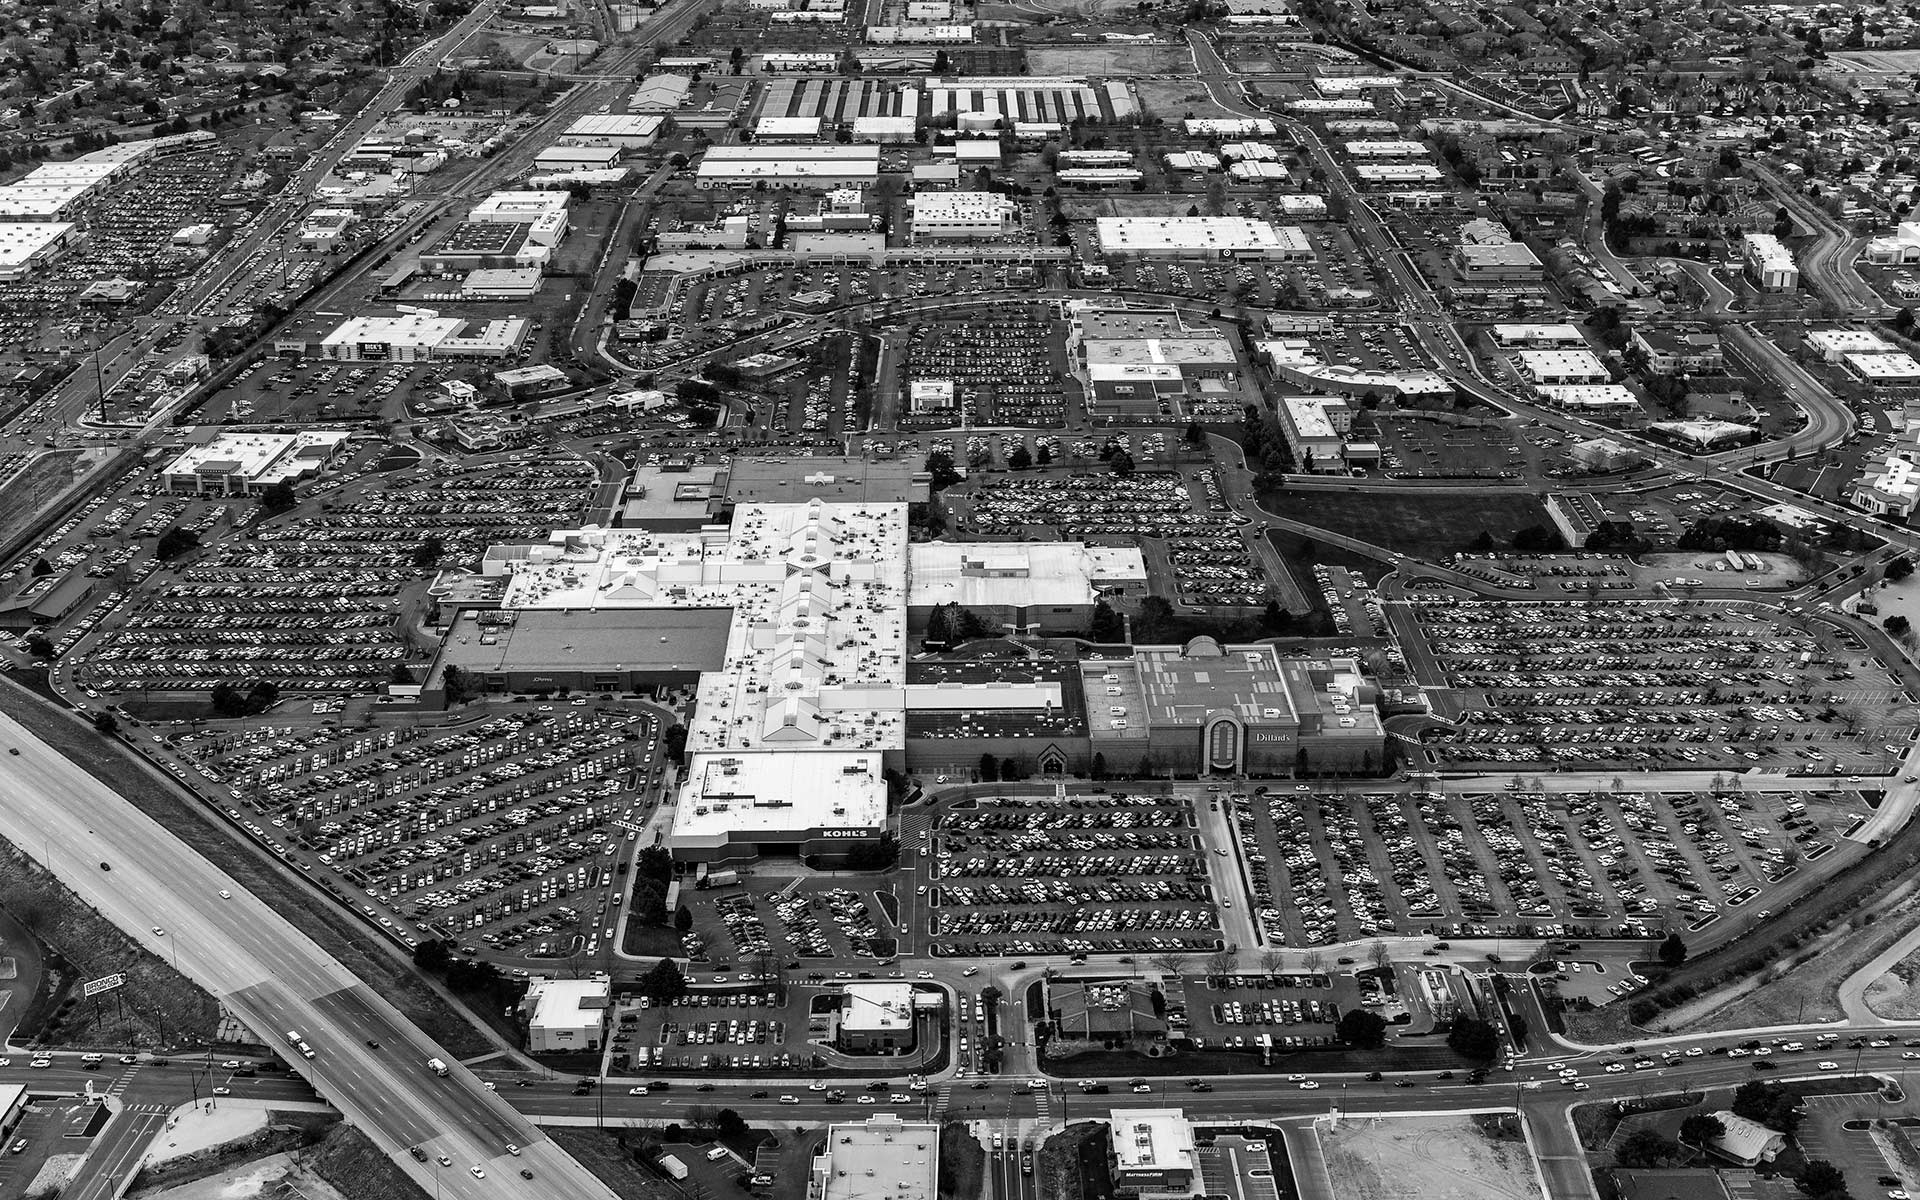 Forensic Aerial Photography-Shopping Traffic on Black Friday, Boise Towne Square Mall.